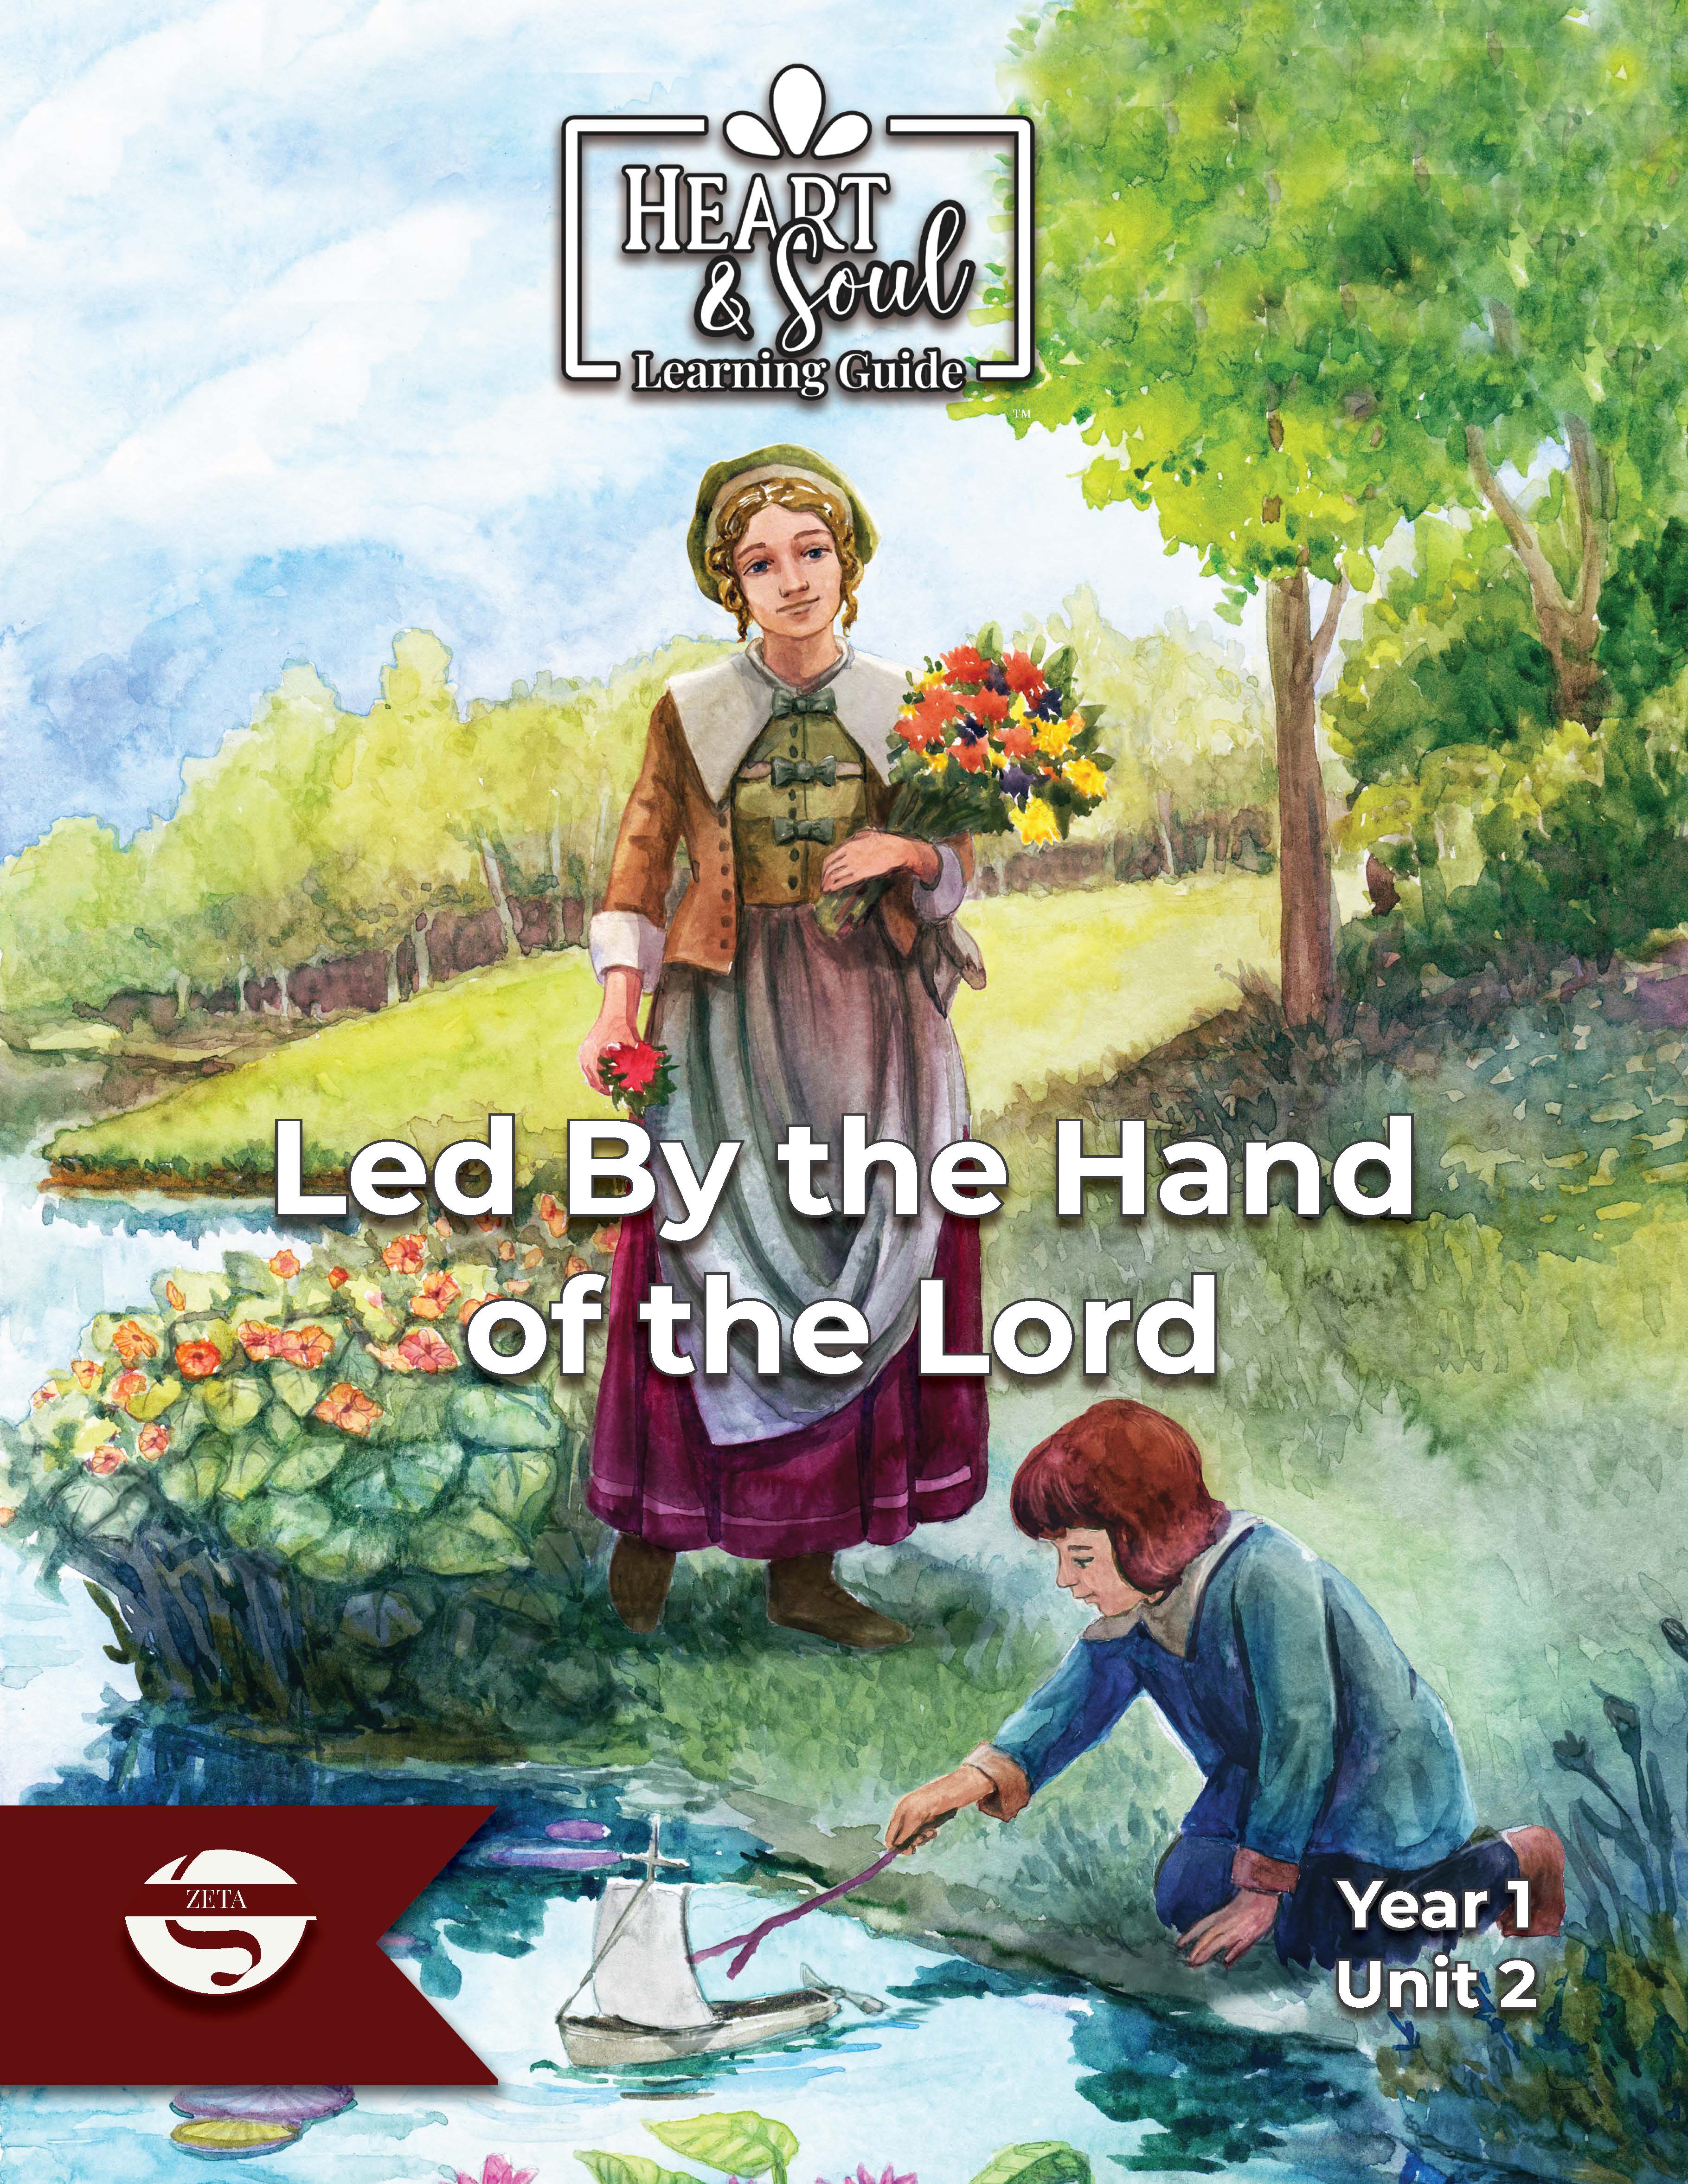 Zeta Heart & Soul Learning Guide: Led By the Hand of the Lord (AH Collection 2)